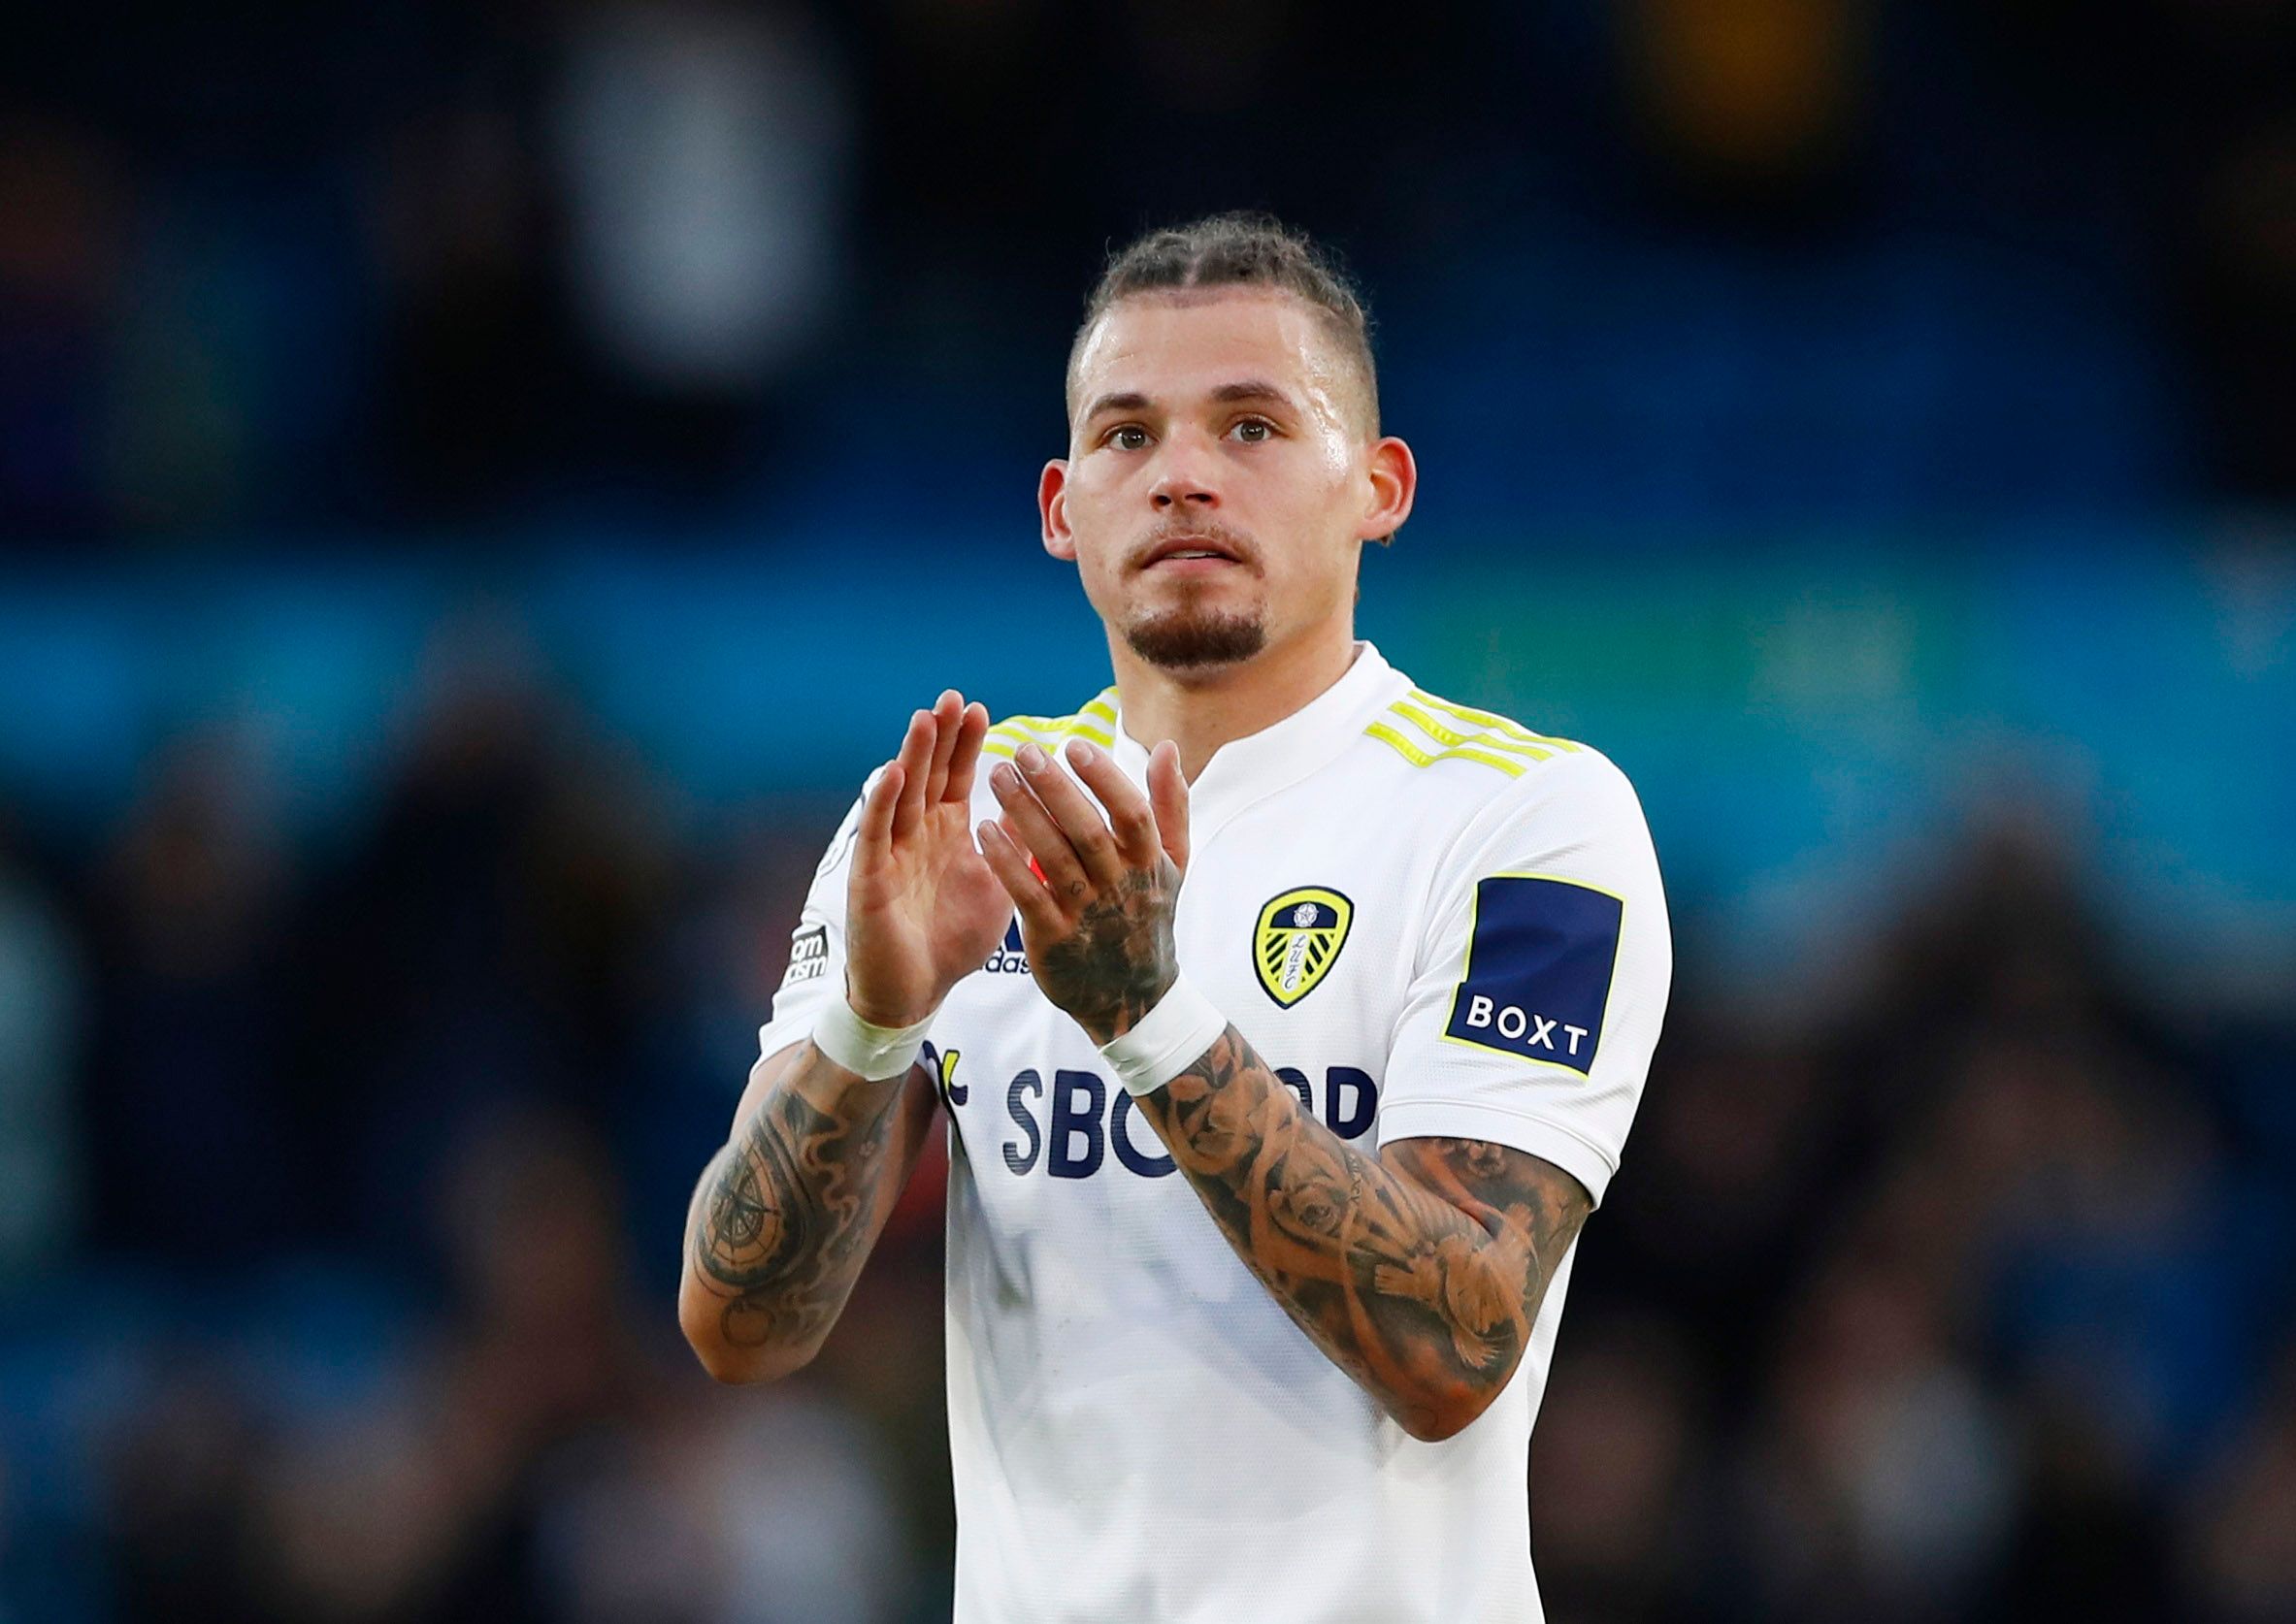 Soccer Football - Premier League - Leeds United v Leicester City - Elland Road, Leeds, Britain - November 7, 2021  Leeds United's Kalvin Phillips applauds fans after the match Action Images via Reuters/Jason Cairnduff EDITORIAL USE ONLY. No use with unauthorized audio, video, data, fixture lists, club/league logos or 'live' services. Online in-match use limited to 75 images, no video emulation. No use in betting, games or single club /league/player publications.  Please contact your account repr